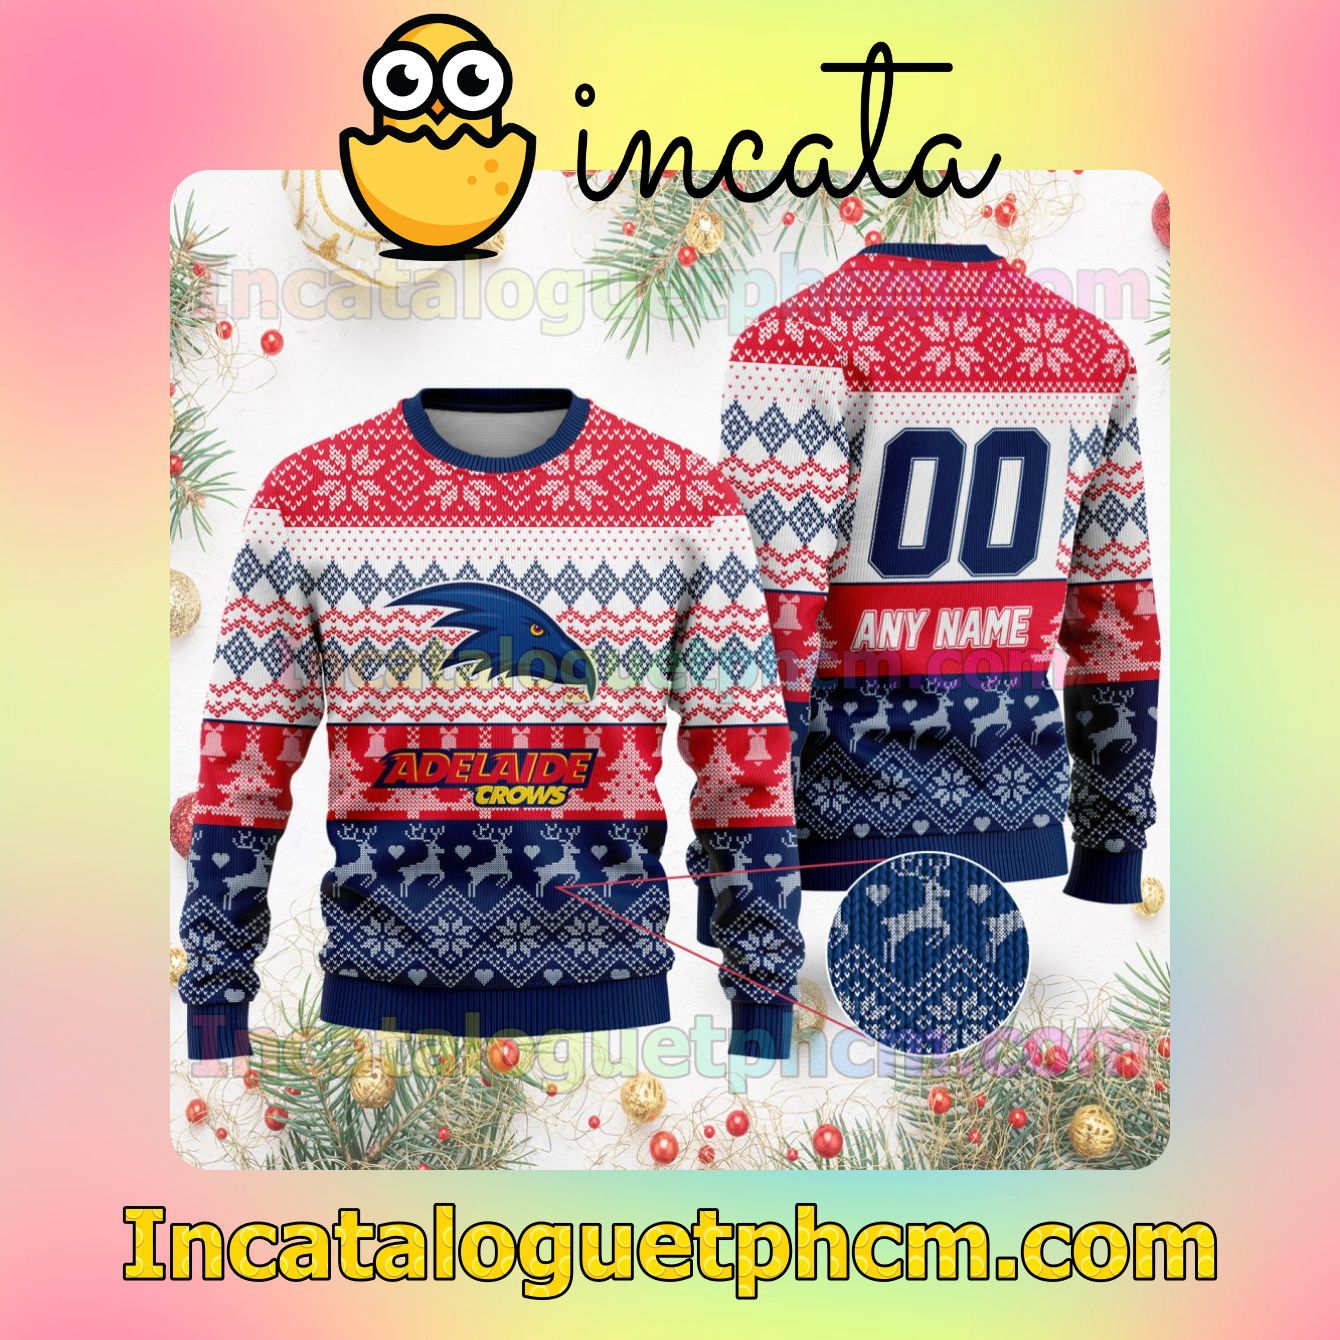  AFL Adelaide Crows Ugly Christmas Jumper Sweater